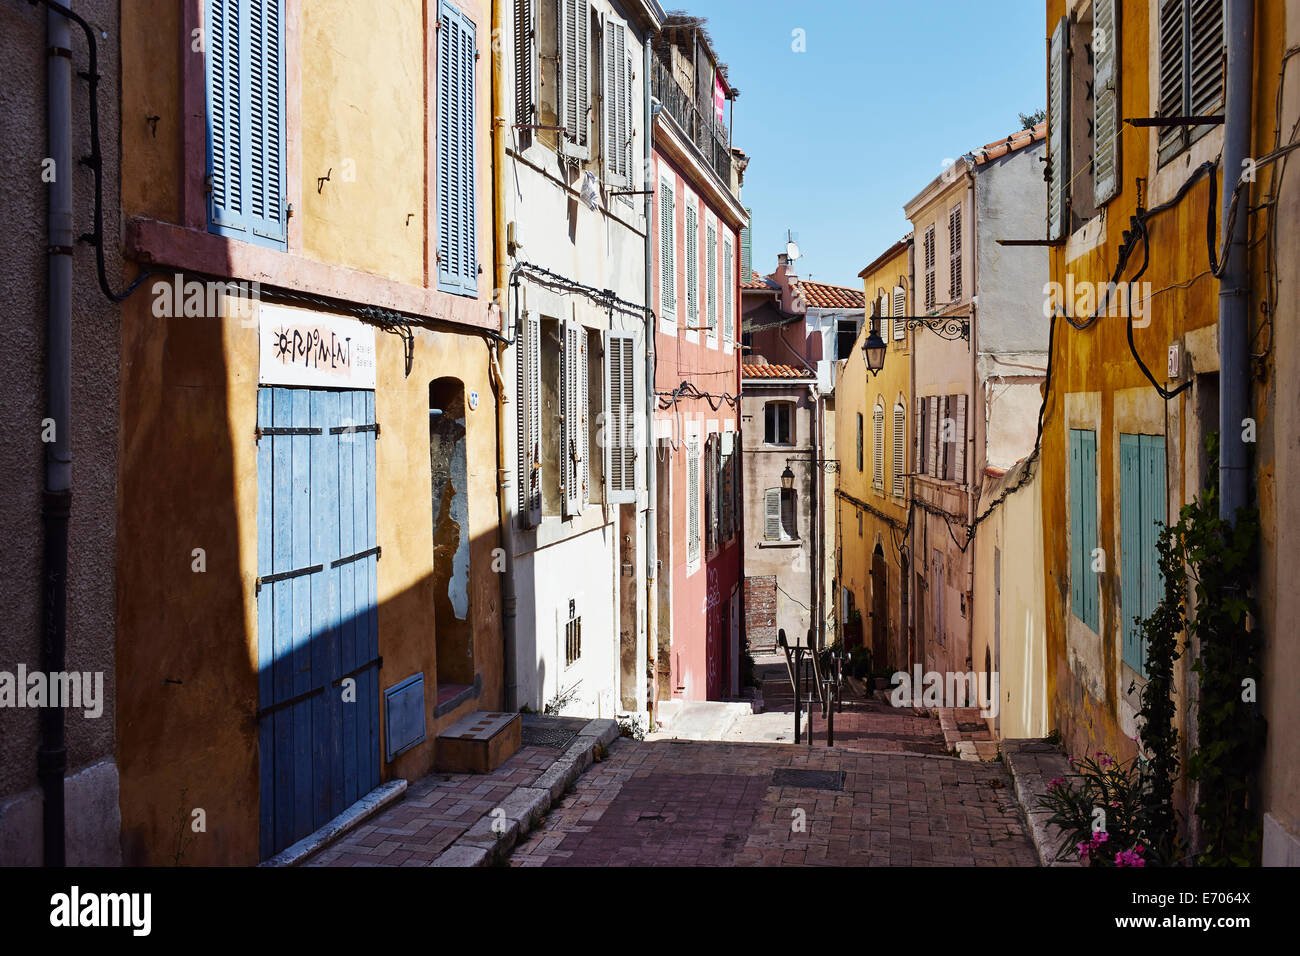 Colorful house exteriors along alleyway, Marseille, France Stock Photo